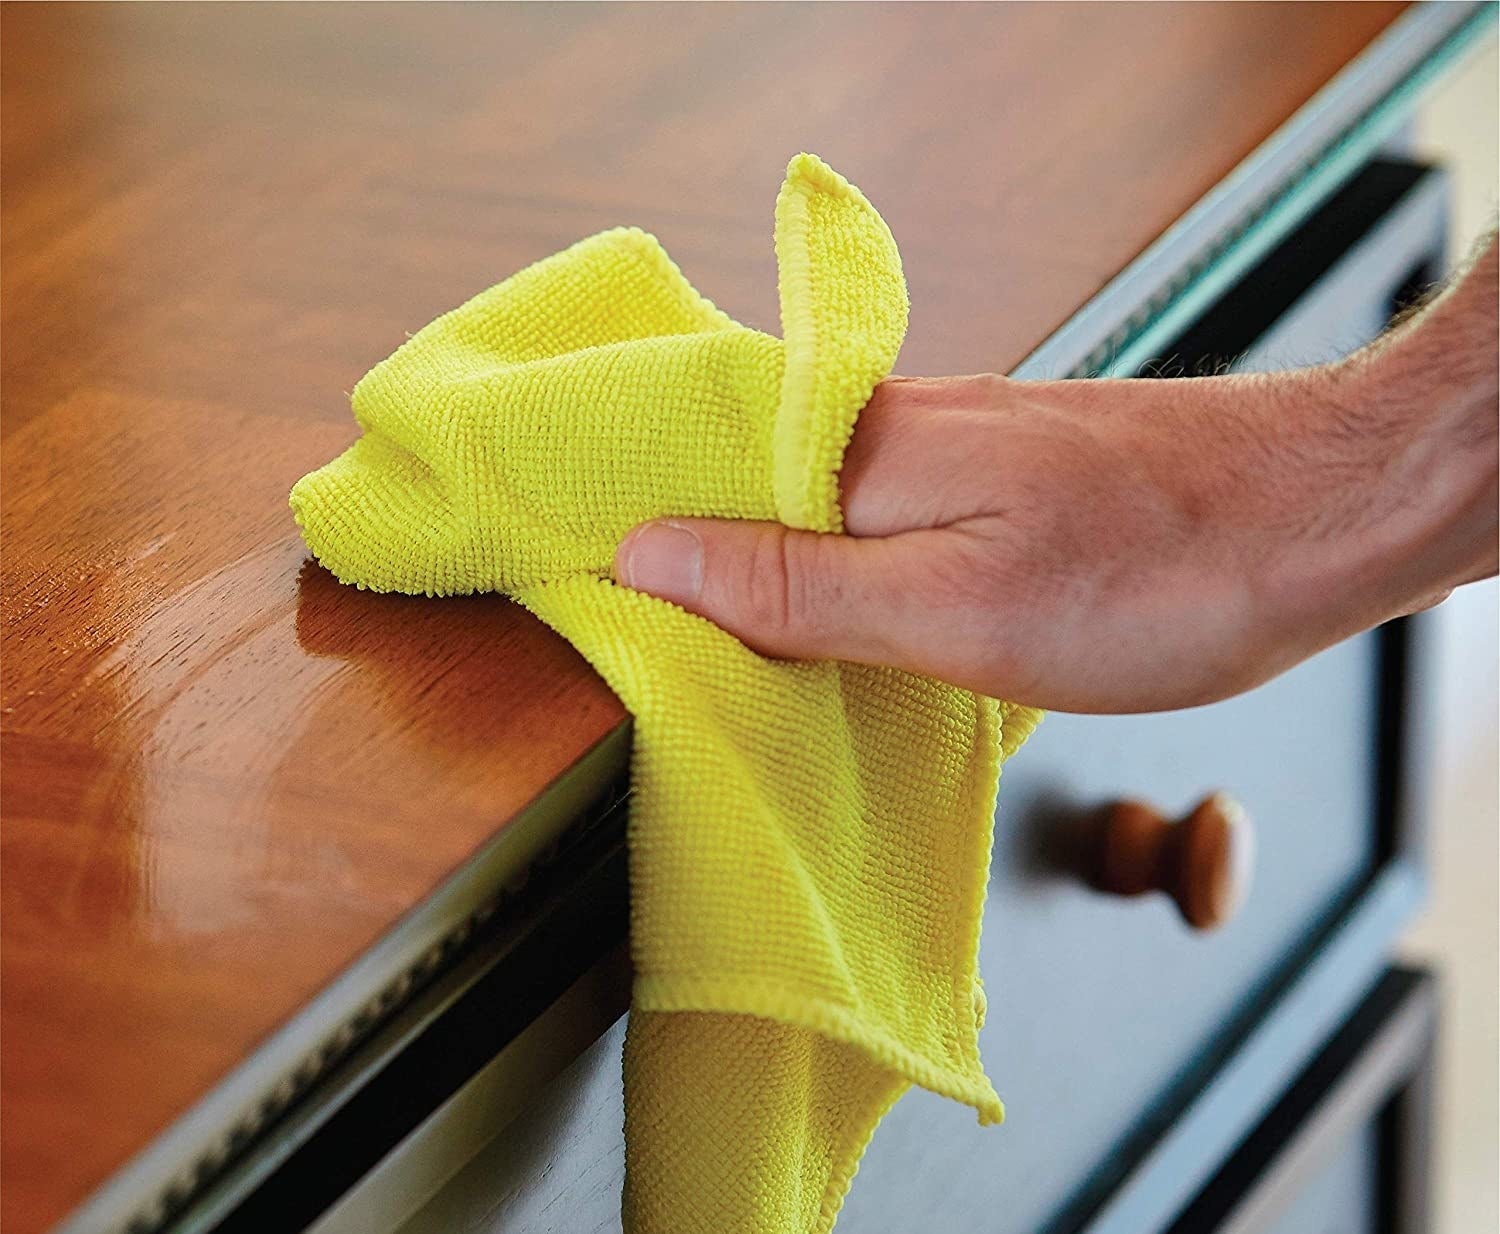 A person wiping a counter with a thick cloth